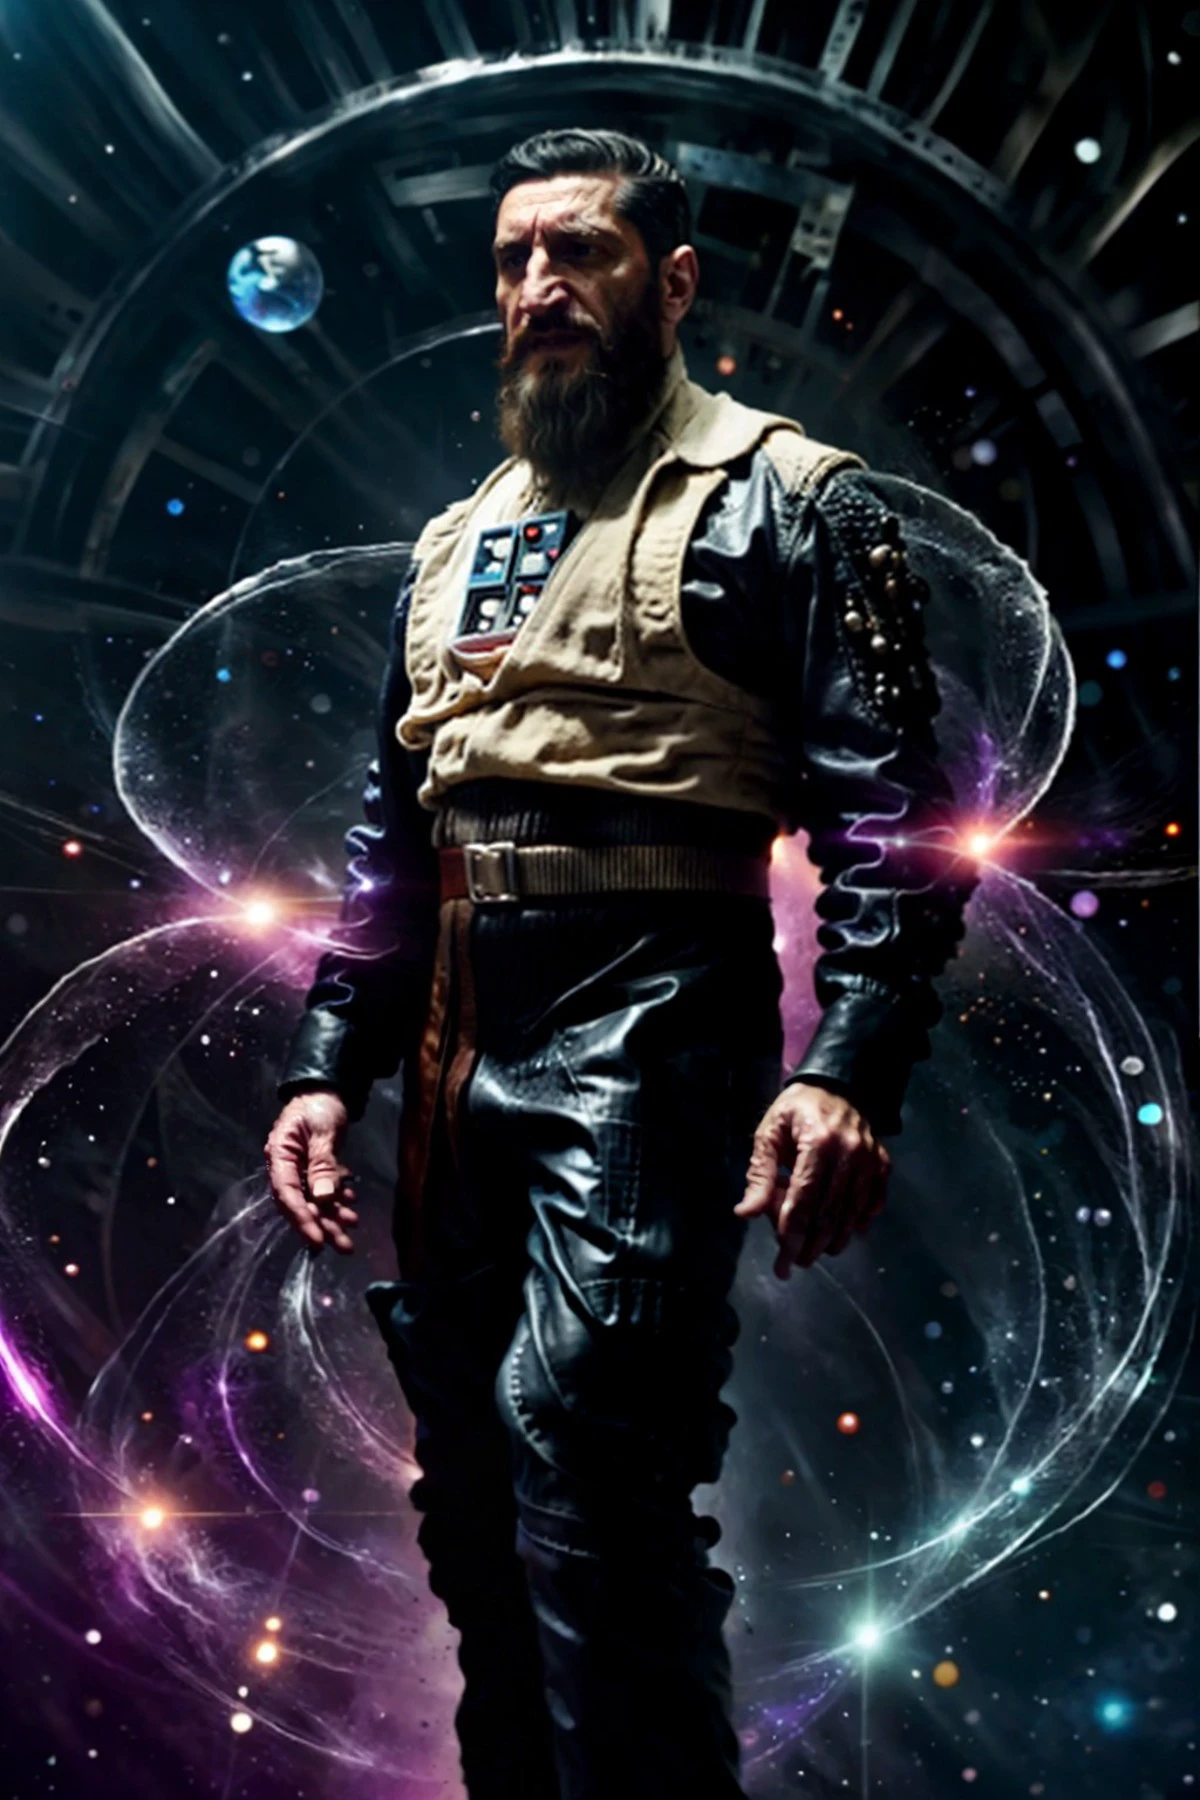 (Fares Fares:1.2) a man with a (slicked-back hair:1.3) wearing a rebel pilot suit, dark space, bright stars, (full:1.2) long (squarish:1.2) big (beard:1.2), devilish (confident looking down:1.2), (a  circle of swirling psionicmagic, psychic energy, mana flow, shimmers, magic filament thread:1.1) is around his body, 4k uhd, dslr, soft light, high quality, Fujifilm XT3  